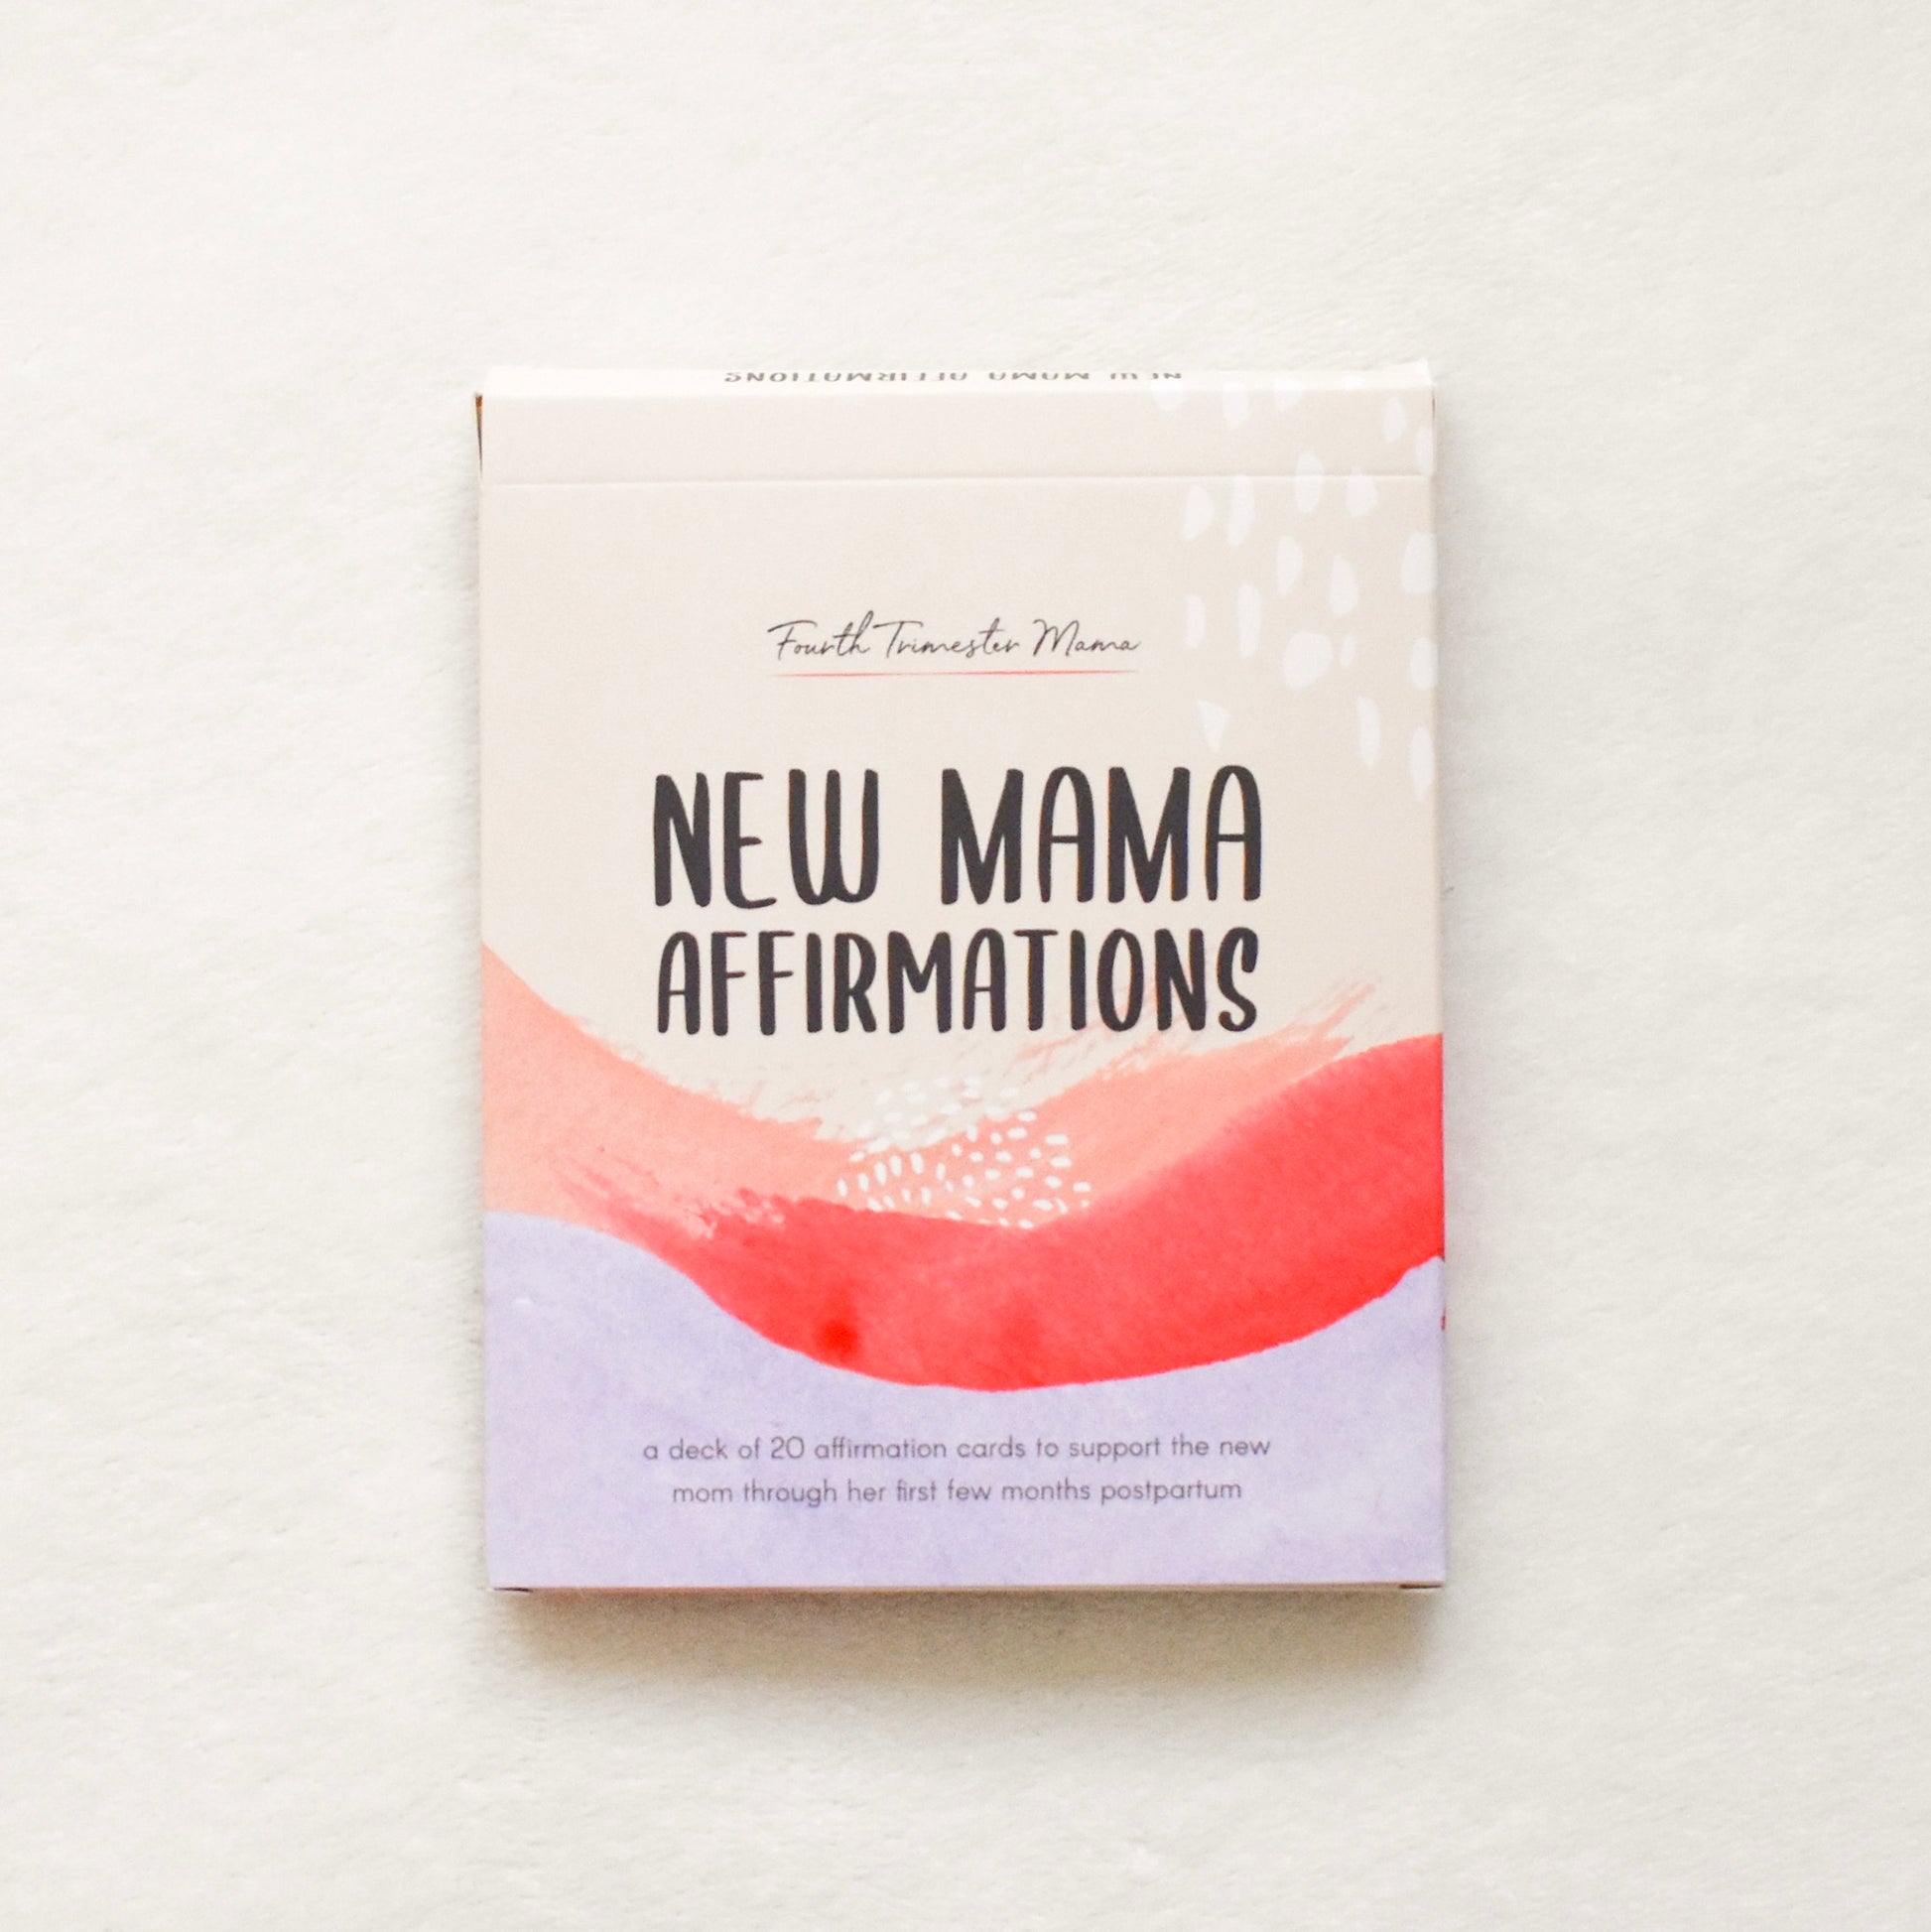 New Mama Affirmations from Fourth Trimester Mama